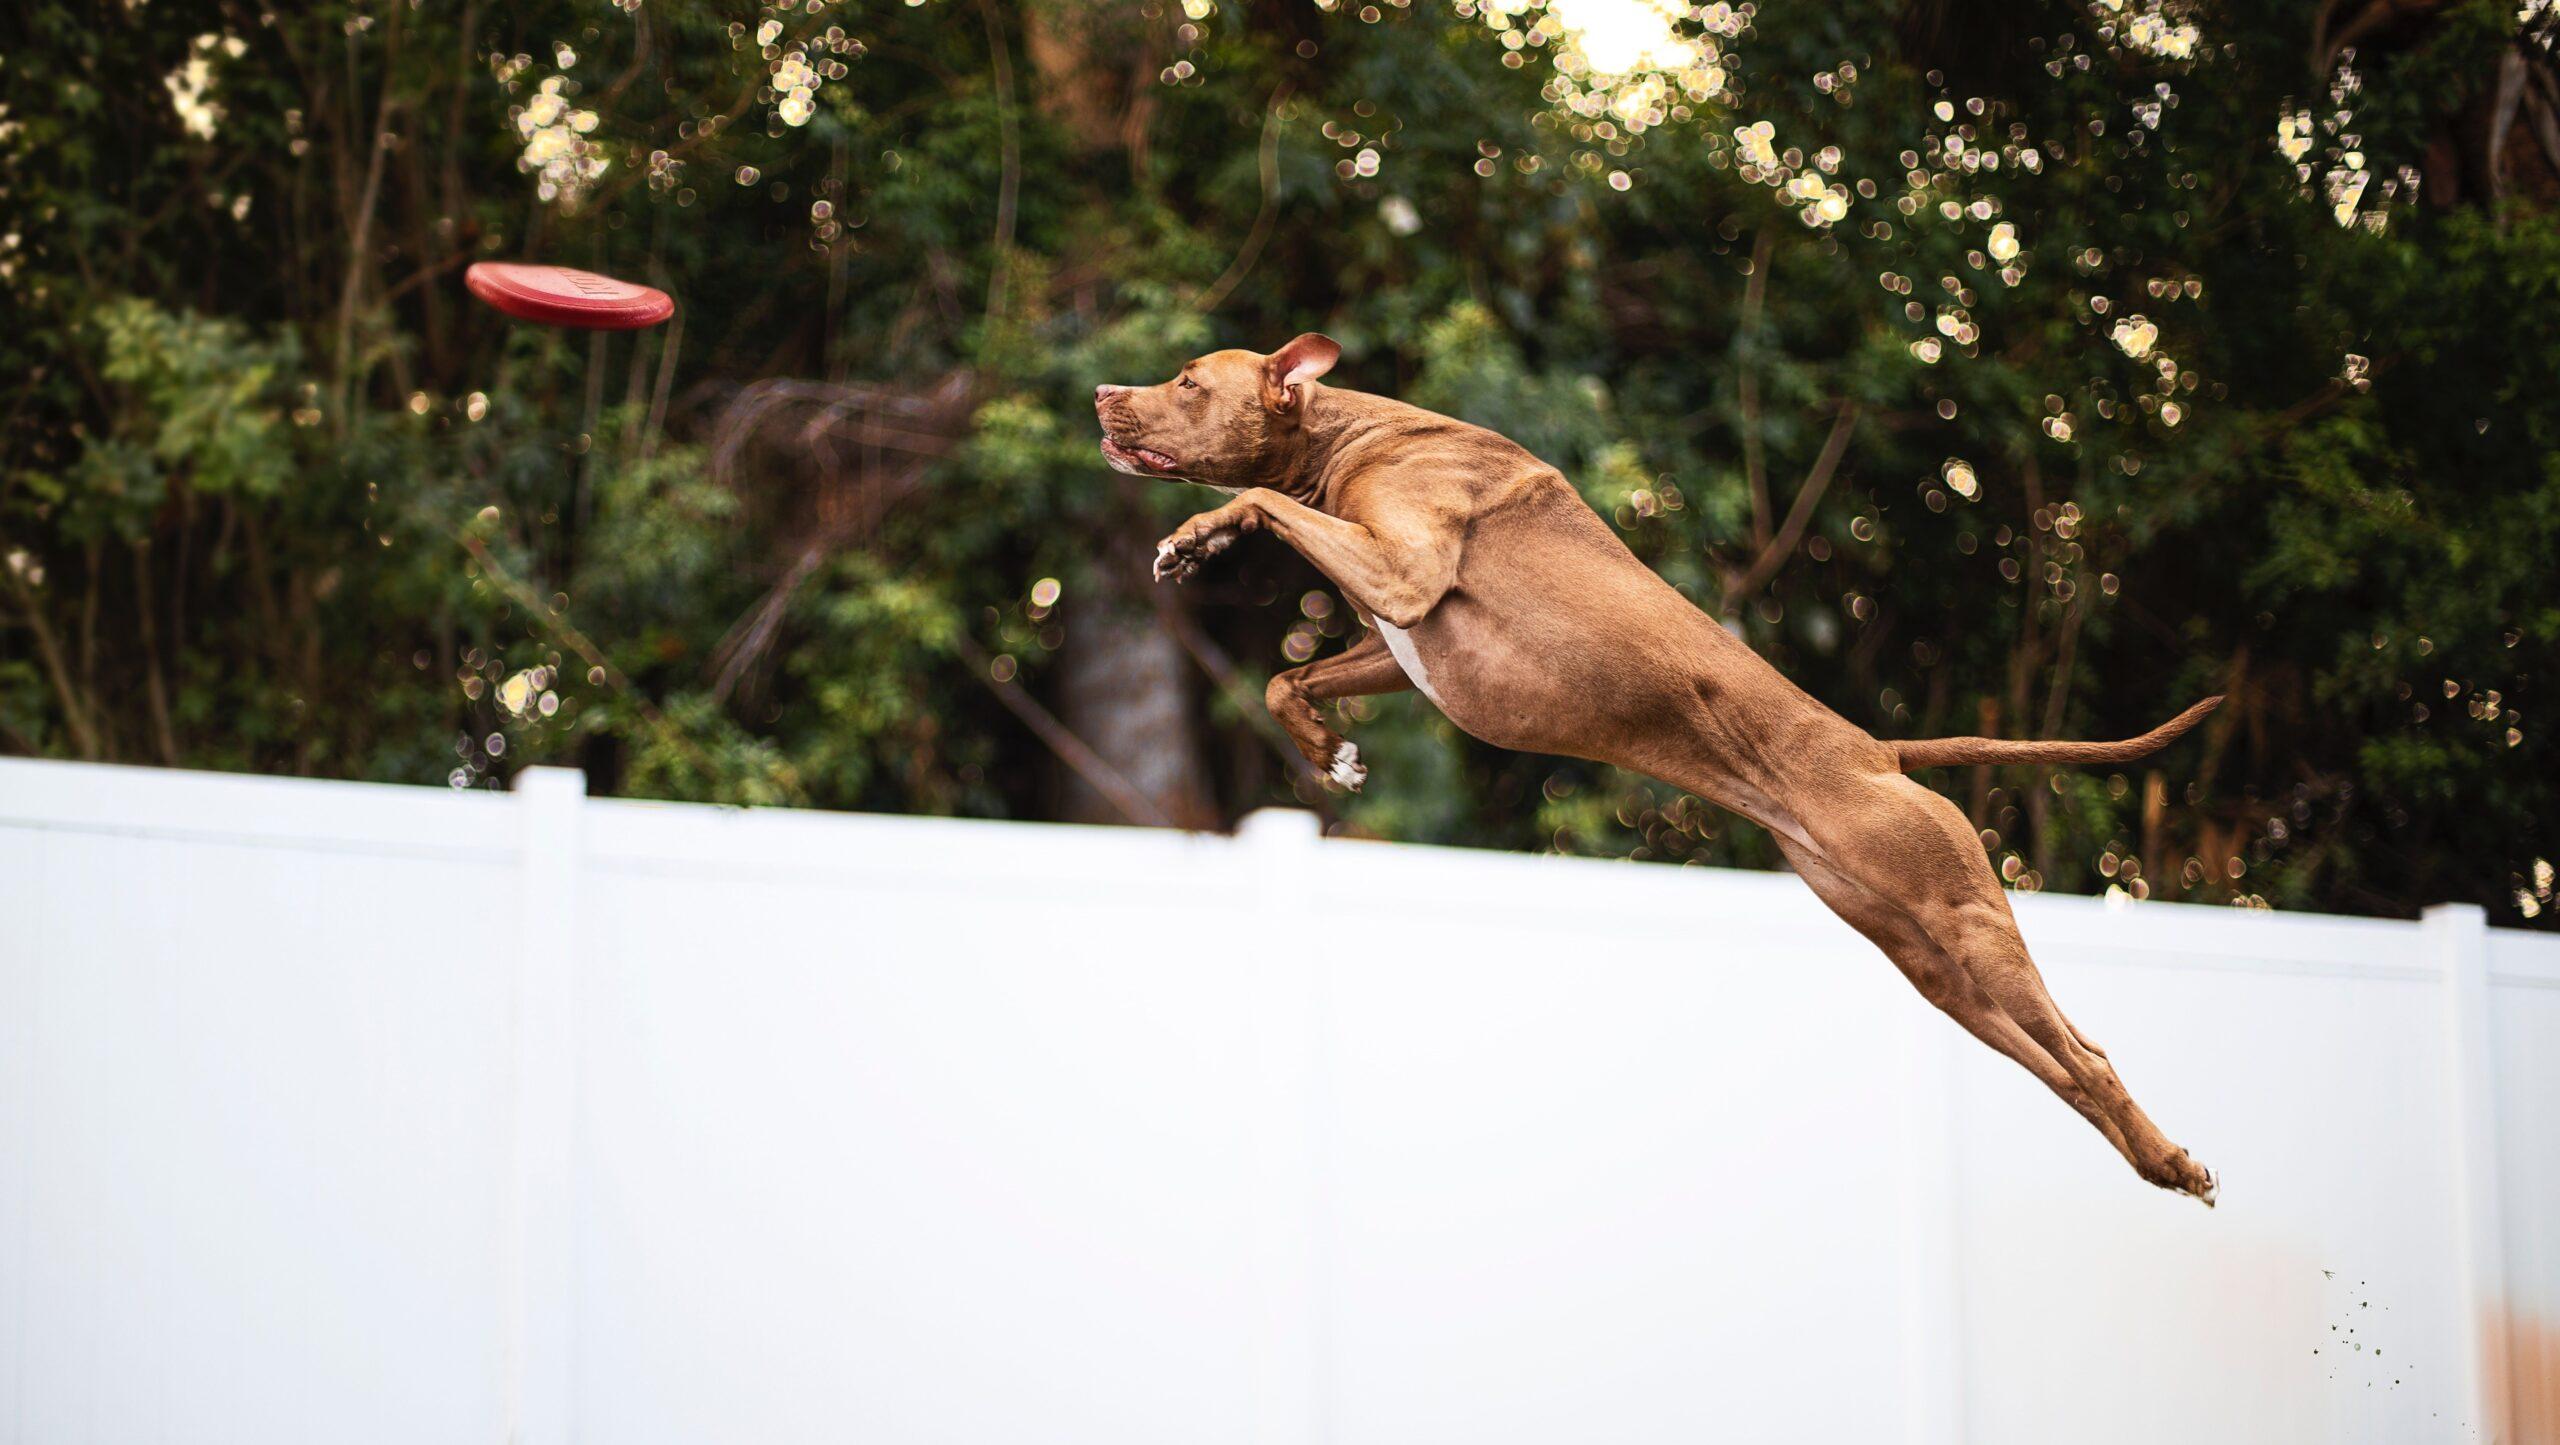 Large, brown dog leaping in an attempt to catch a Frisbee.